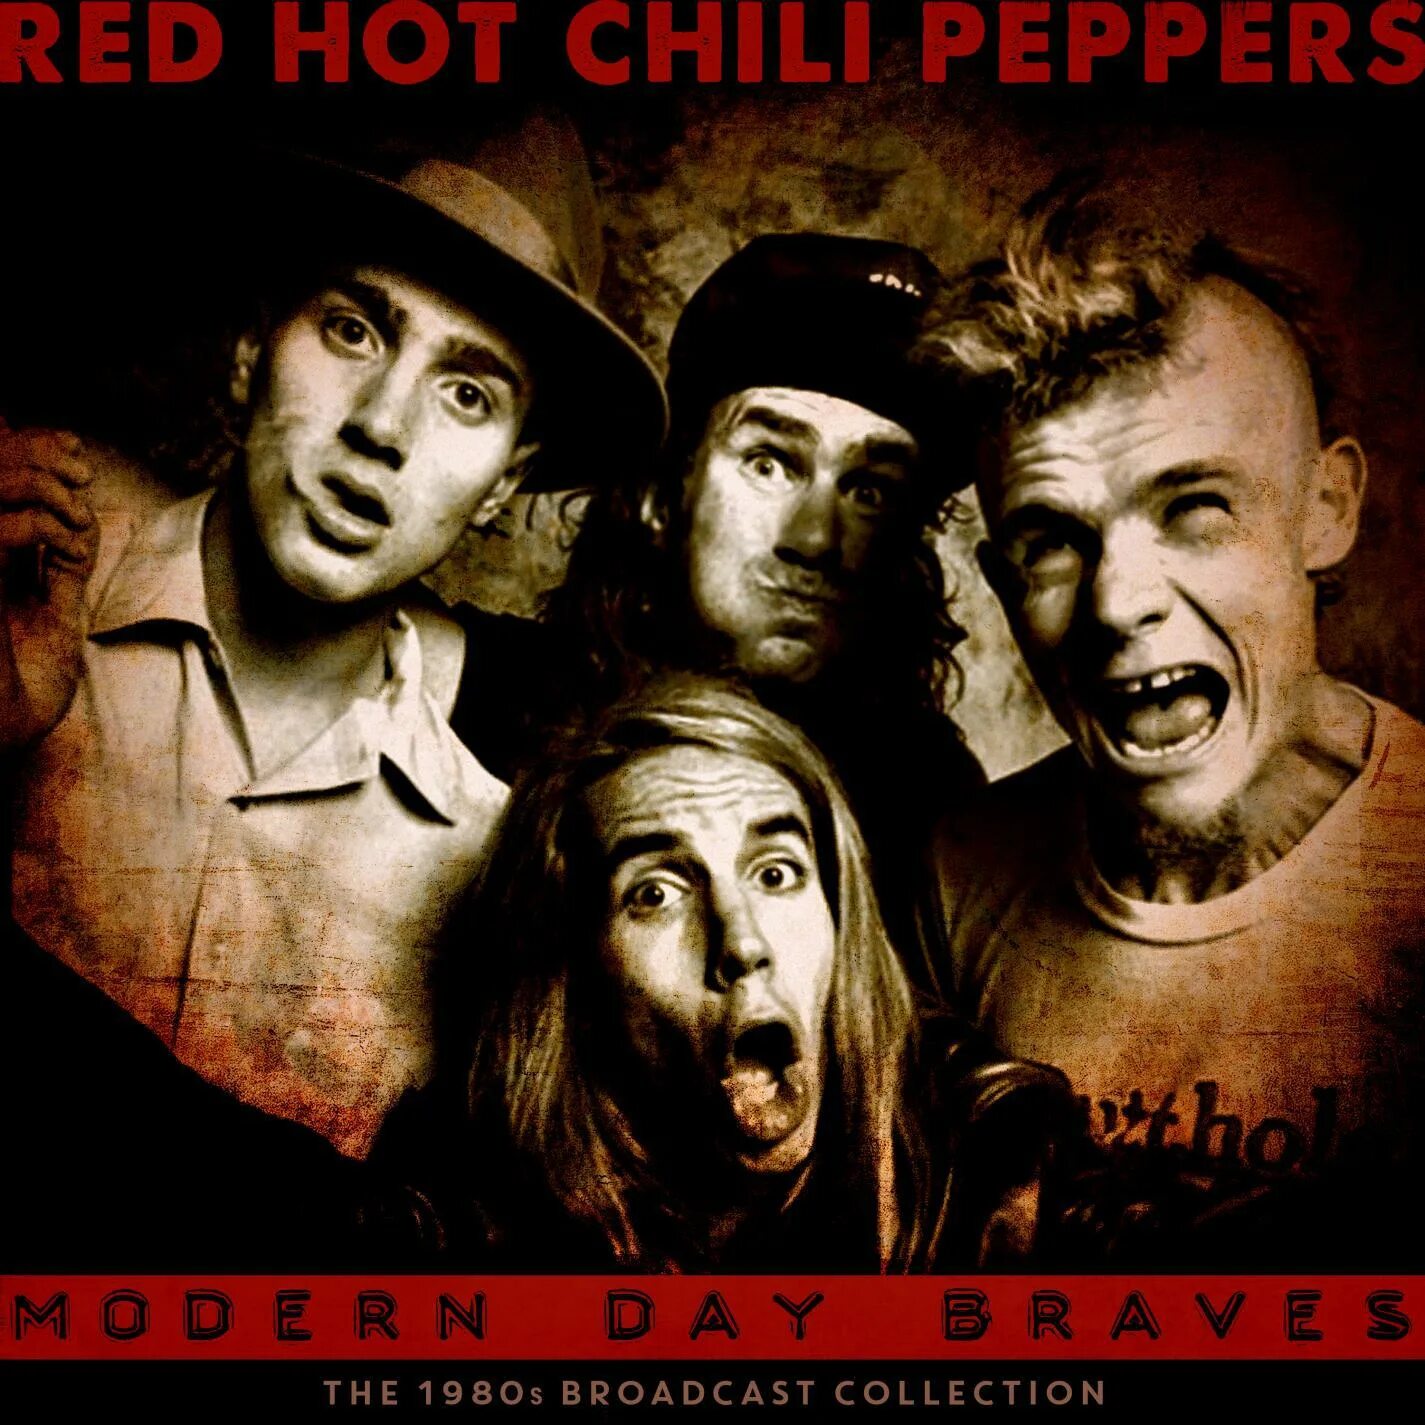 Chili peppers mp3. RHCP 1988. RHCP 1989. Red hot Chili Peppers. Ред хот Чили Пепперс.